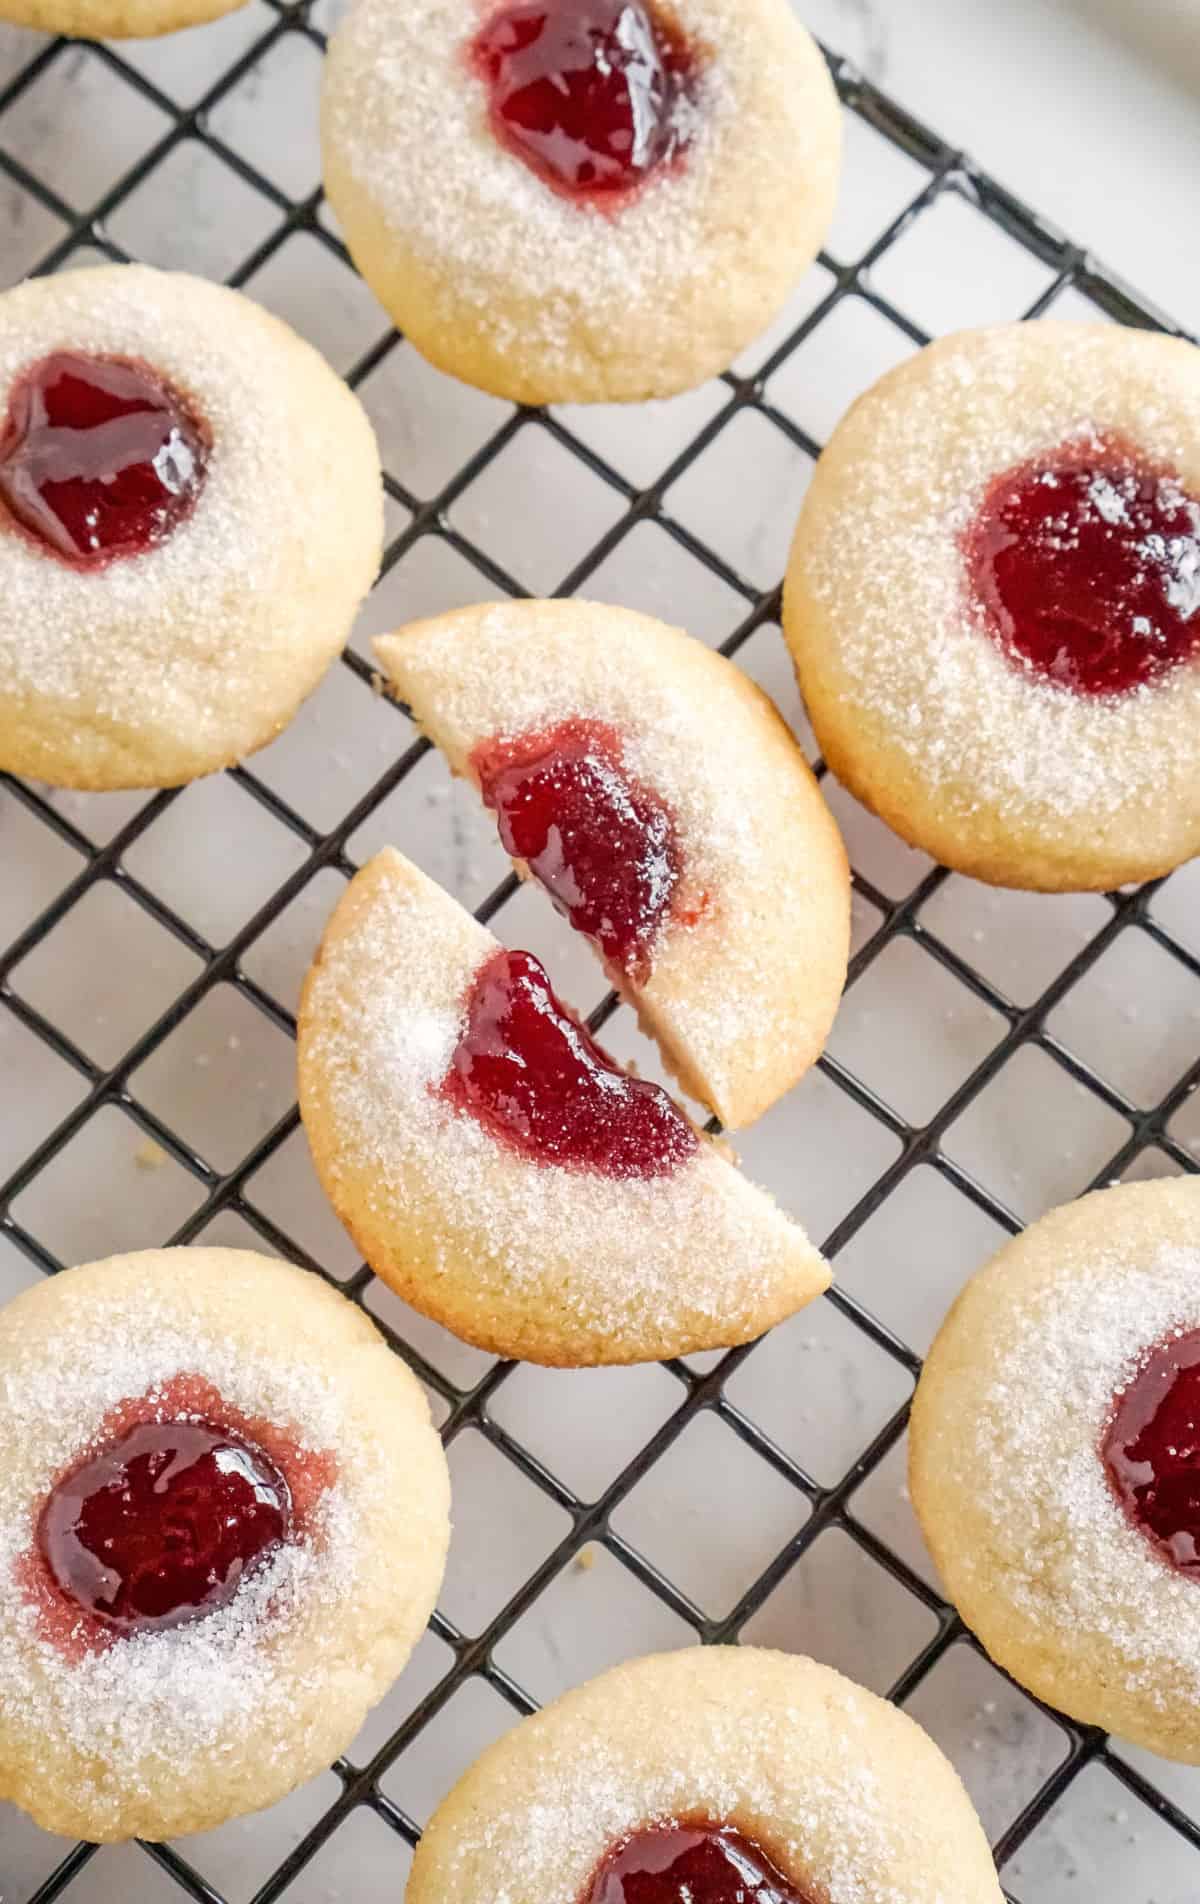 Several raspberry thumbprint cookies on a cooling rack. One has been cut in half.